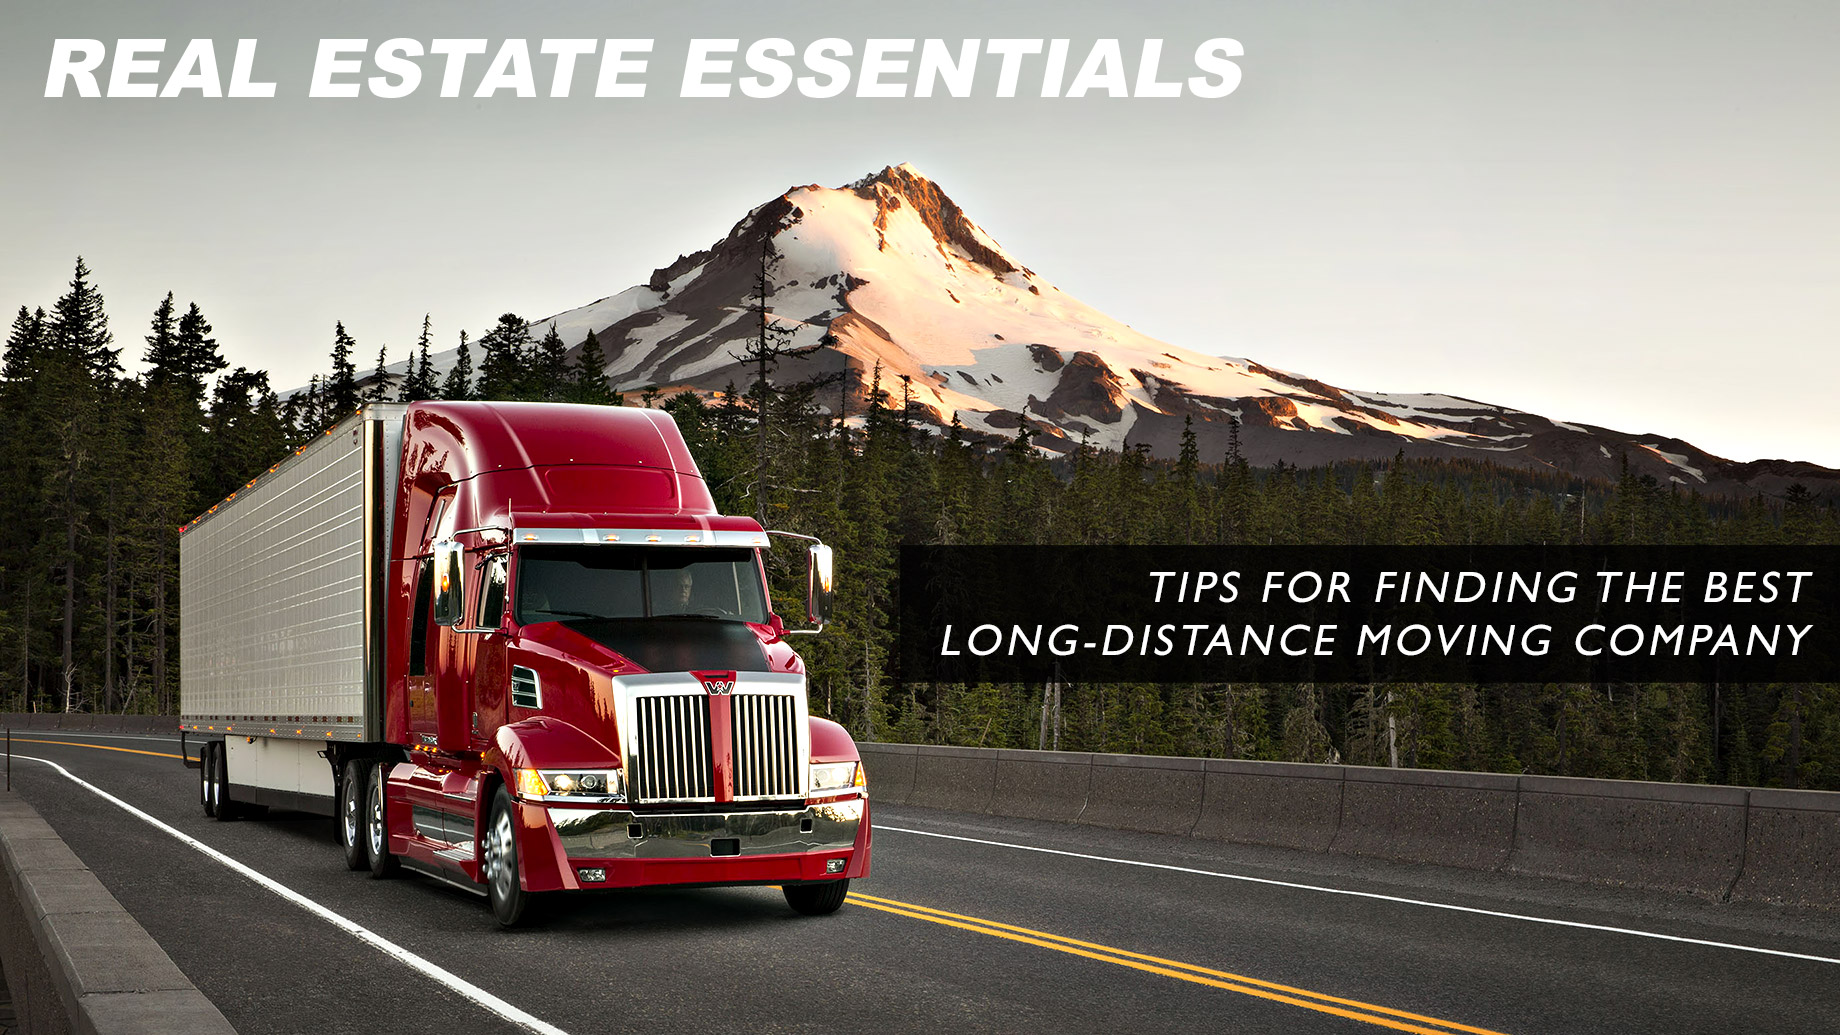 Real Estate Essentials - Tips for Finding the Best Long-Distance Moving Company